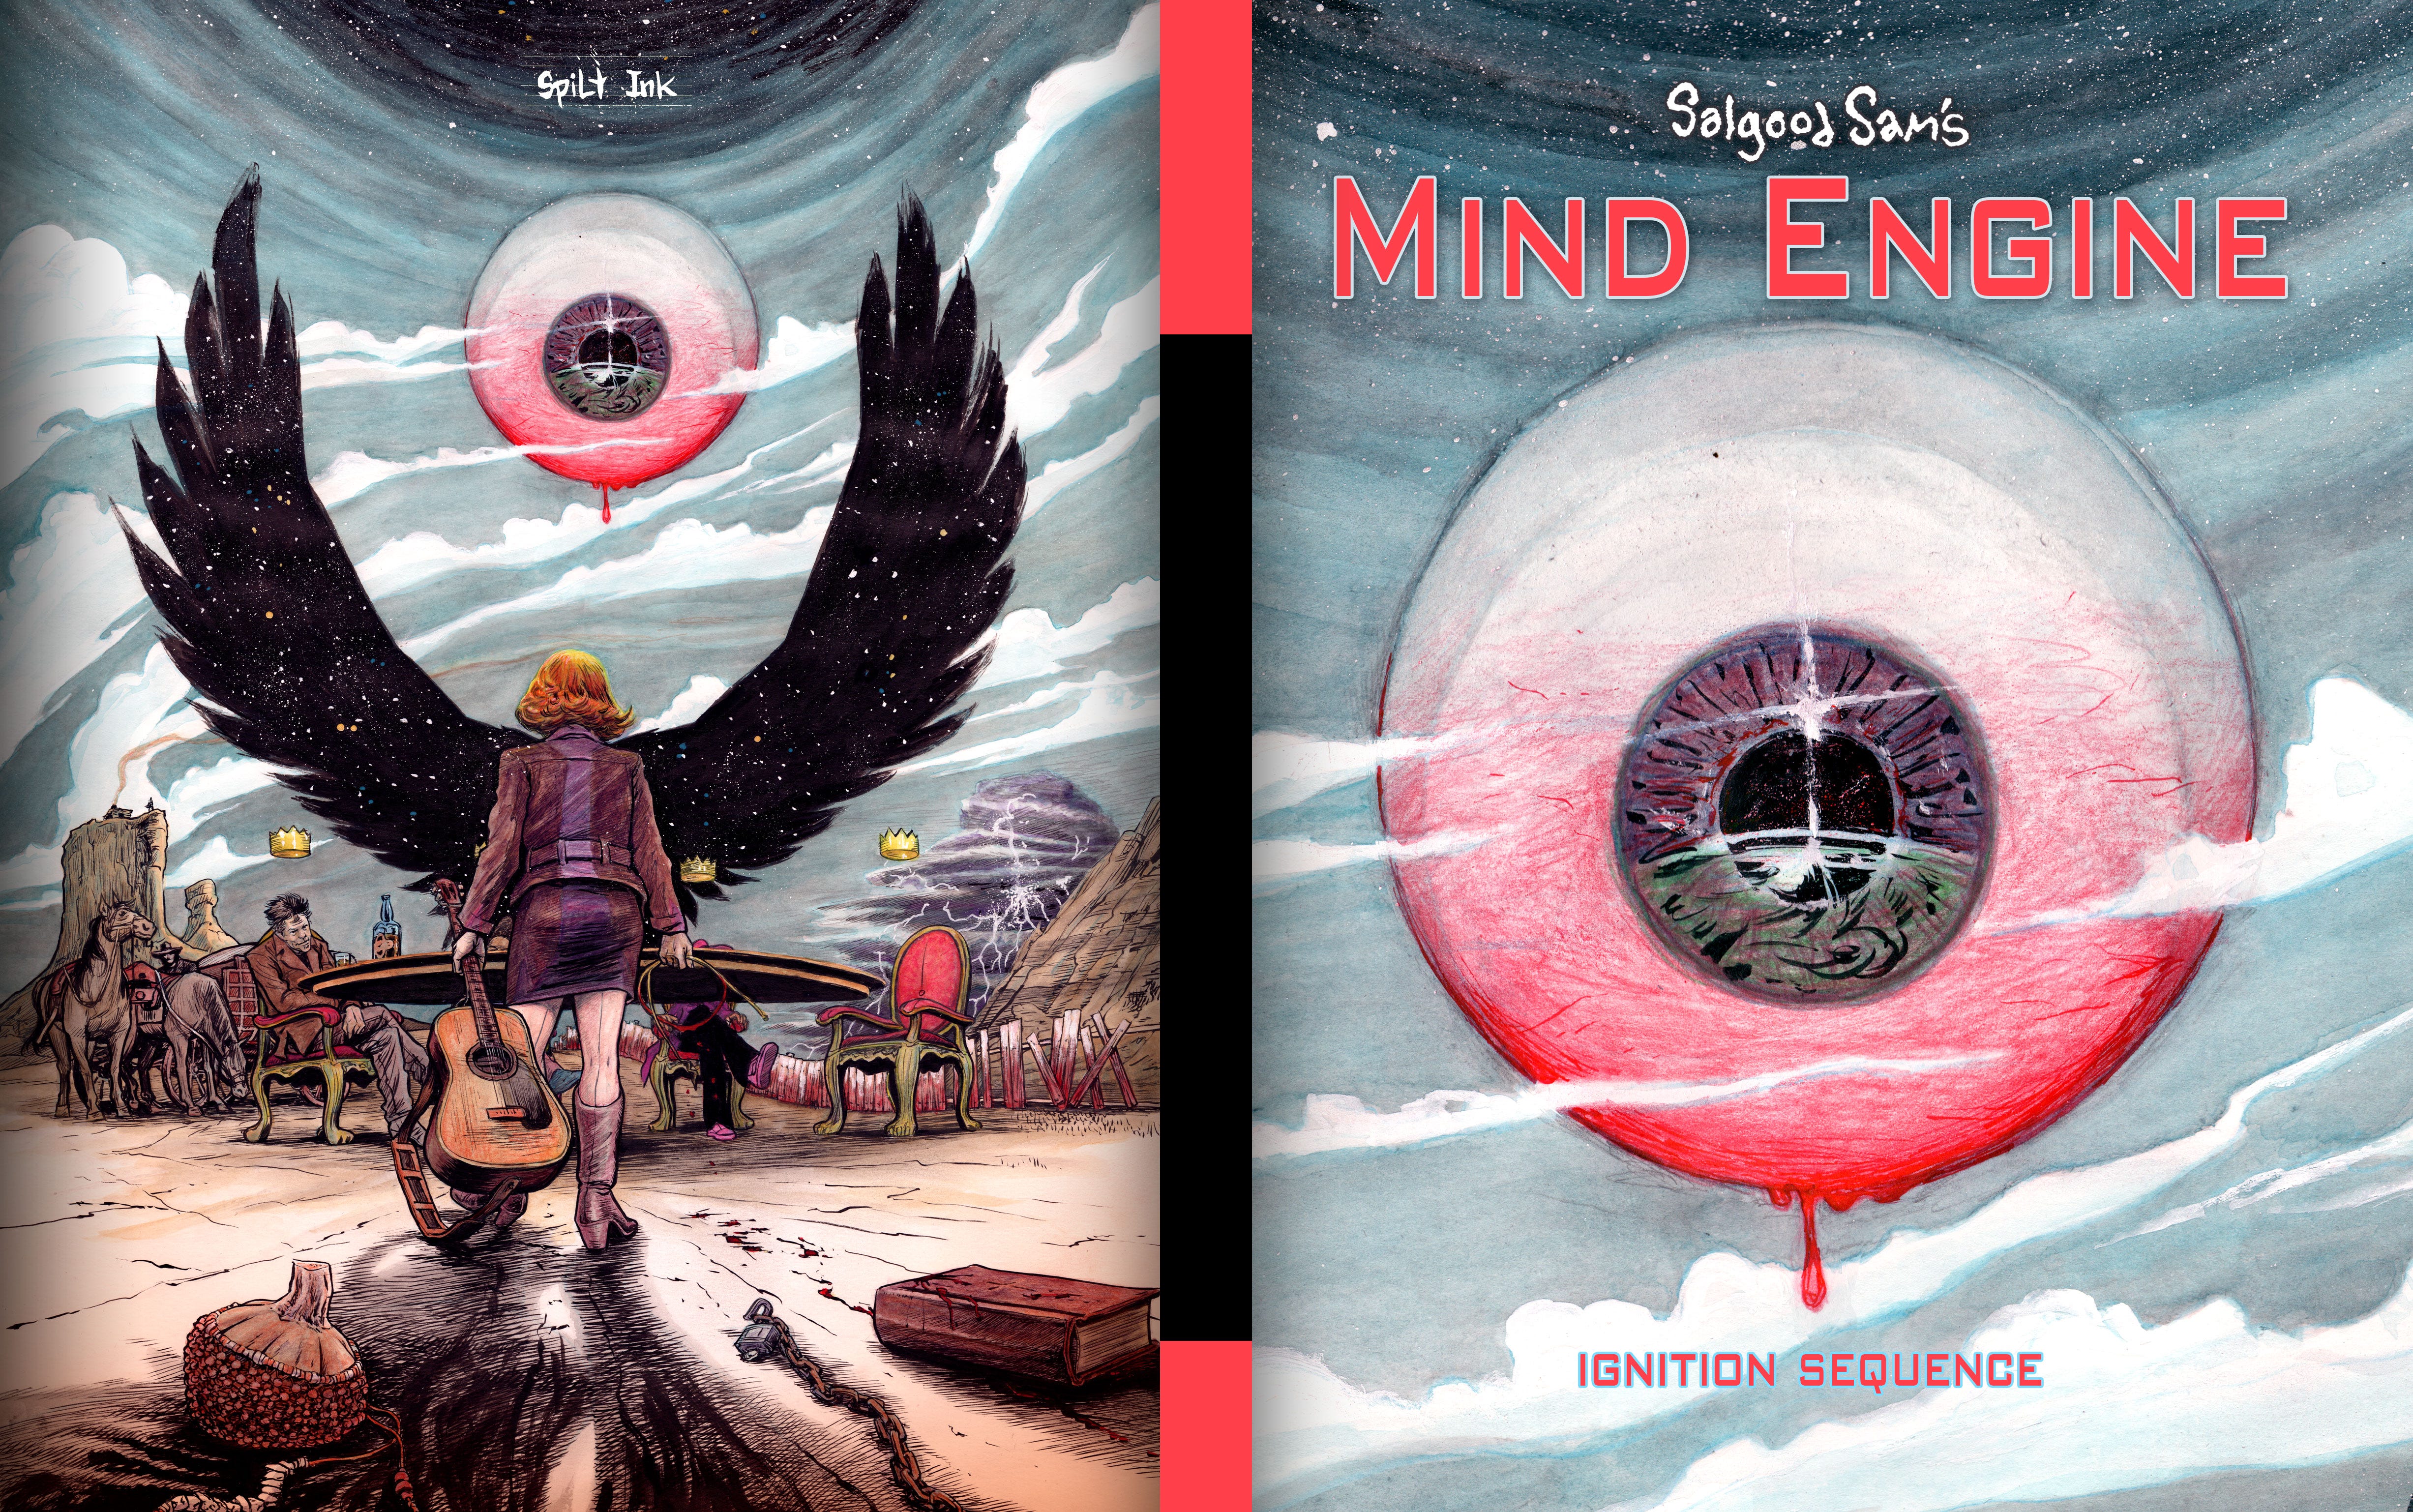 Cover art for Mind Engine 0, ignition sequence.